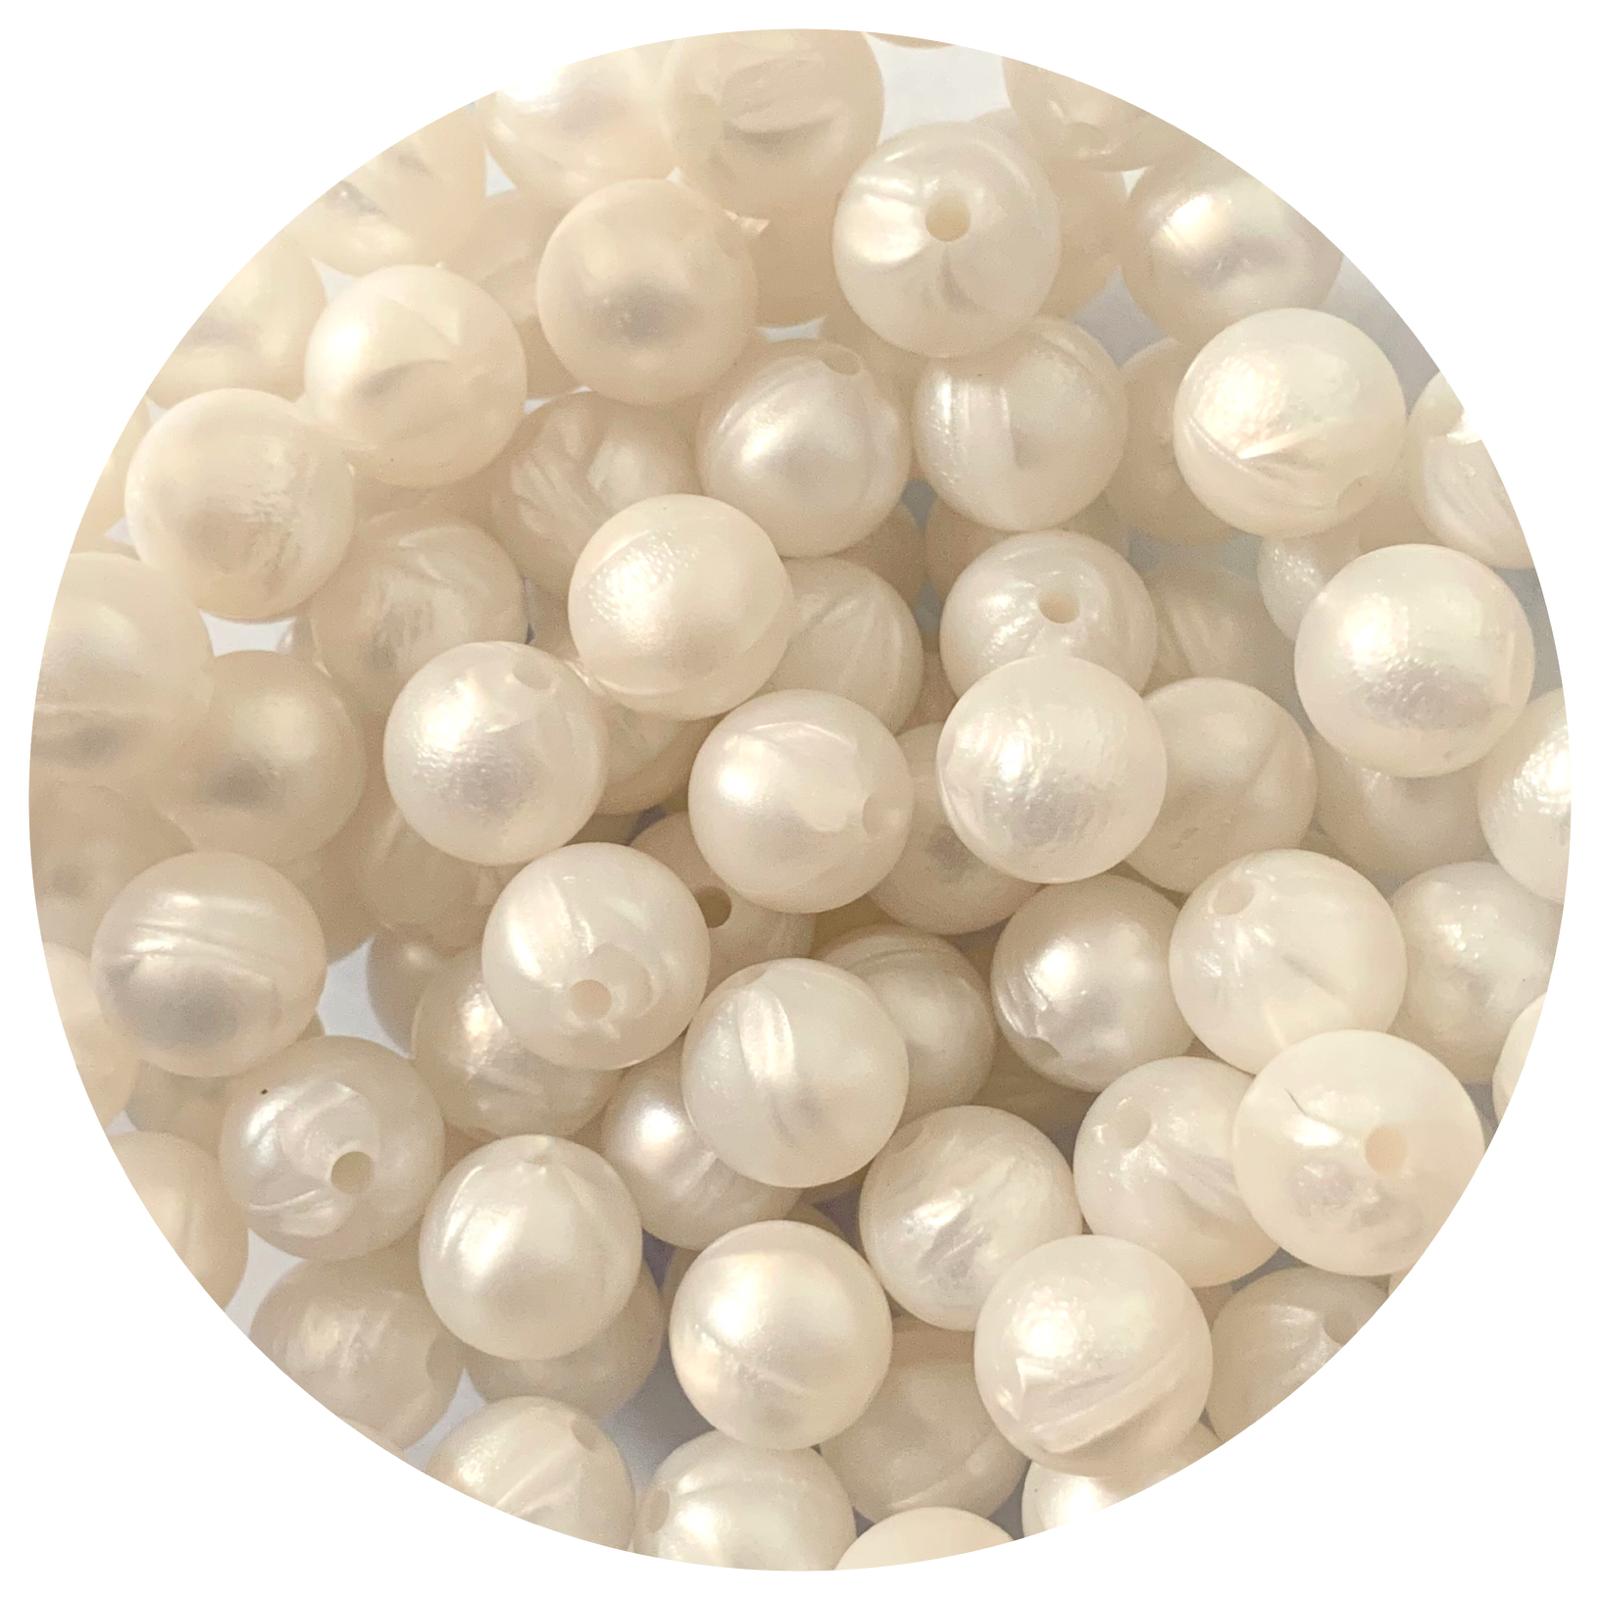 Pearl White - 12mm Round Silicone Beads - 10 beads